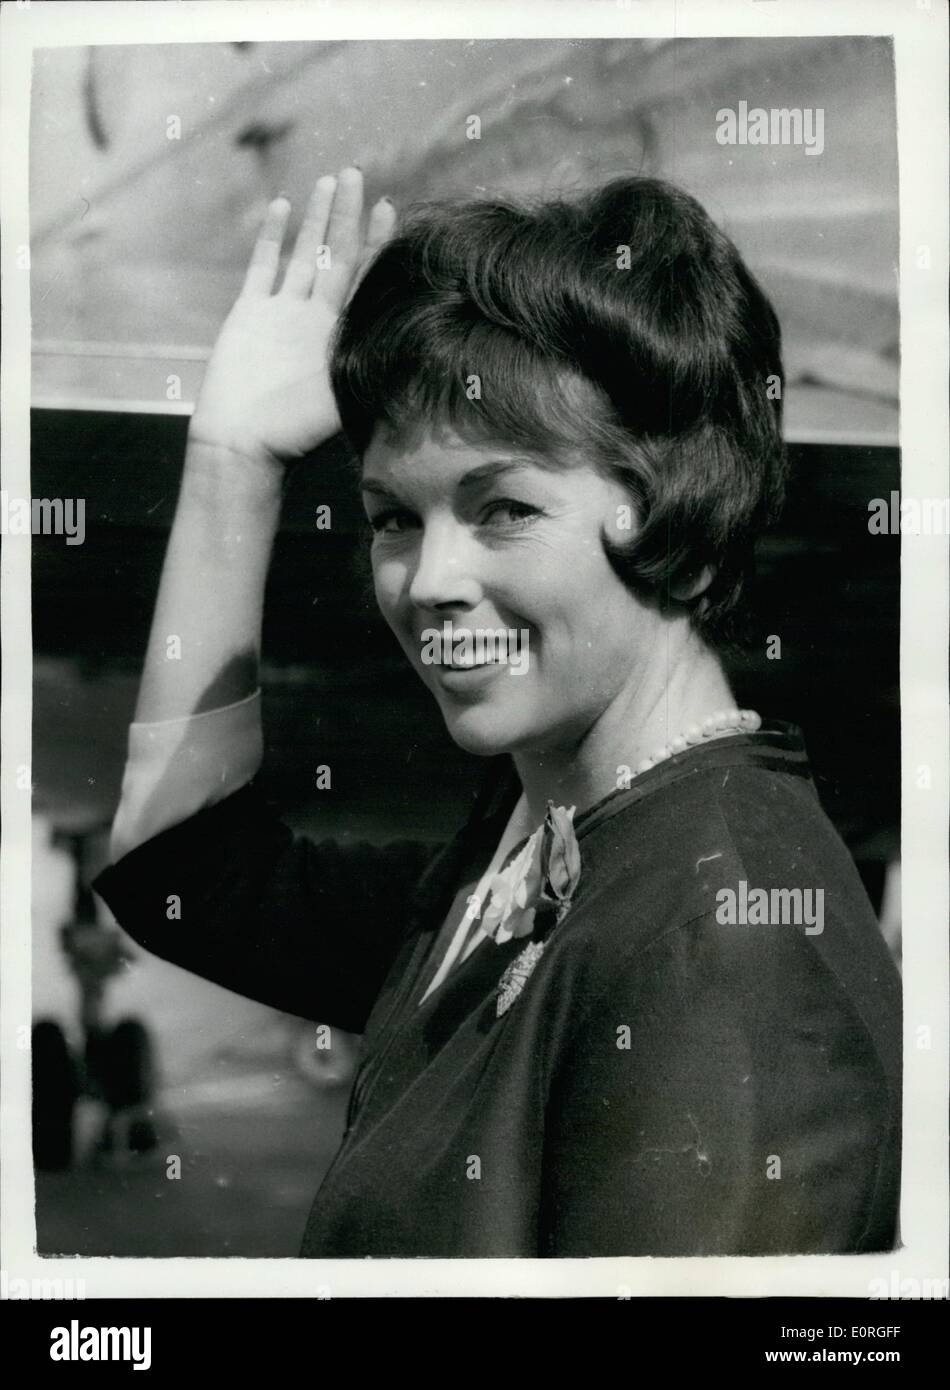 Aug. 08, 1959 - Dawn Addams arrives for B.B.C. TV play. Actress Dawn Addams arrived at London Airport this afternoon. She is to take part in her first British TV play when she co-stars with Donald Pleasance in the Bernard Shaw Comedy The Millionairess on Sunday 6th Sept. Dawn has applied for a French divorce from her Italian husband Prince Vittorio Massimo on the grounds of Cruelty and Violence. Keystone Photo Shows: Dawn Addams on her arrival at London Airport this afternoon. JSS/Keystone Stock Photo